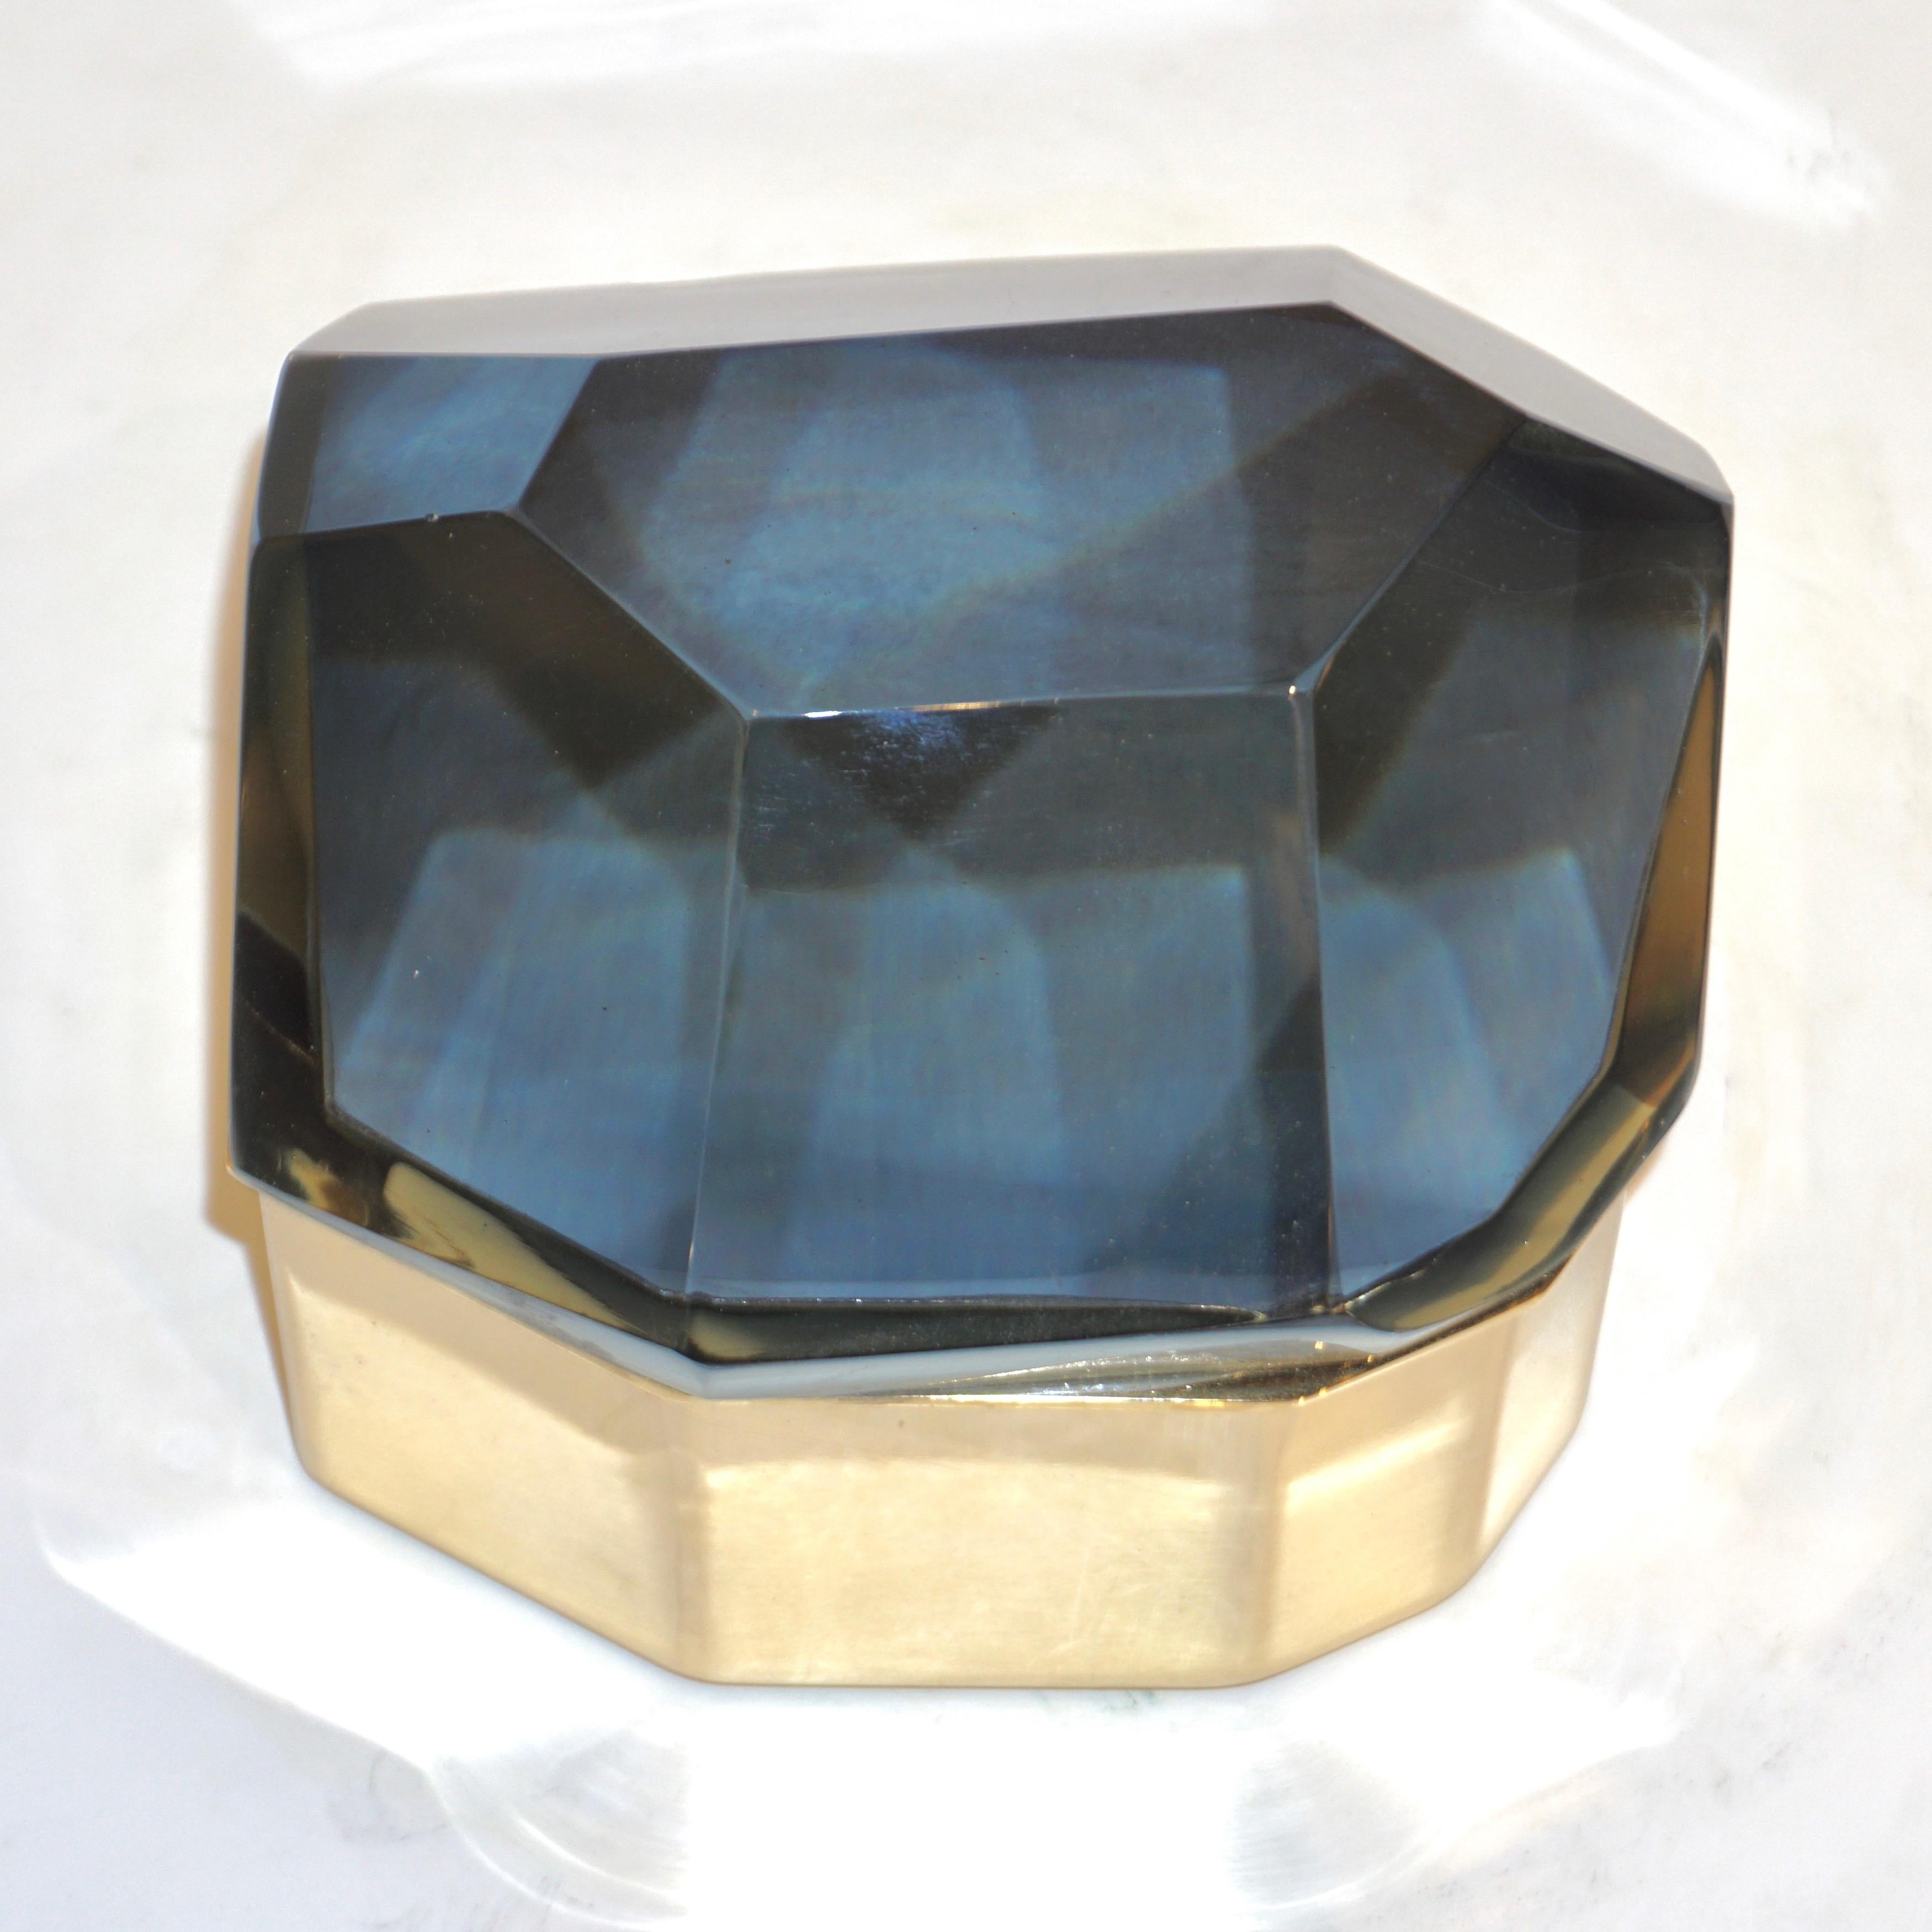 Italian contemporary organic casket, entirely handcrafted, by Toso Vetri d'Arte (Murano) with a freeform geometric brass case embellished by a smoked grey cover in blown rock Murano glass, handcut like a diamond. Available in other finishes and